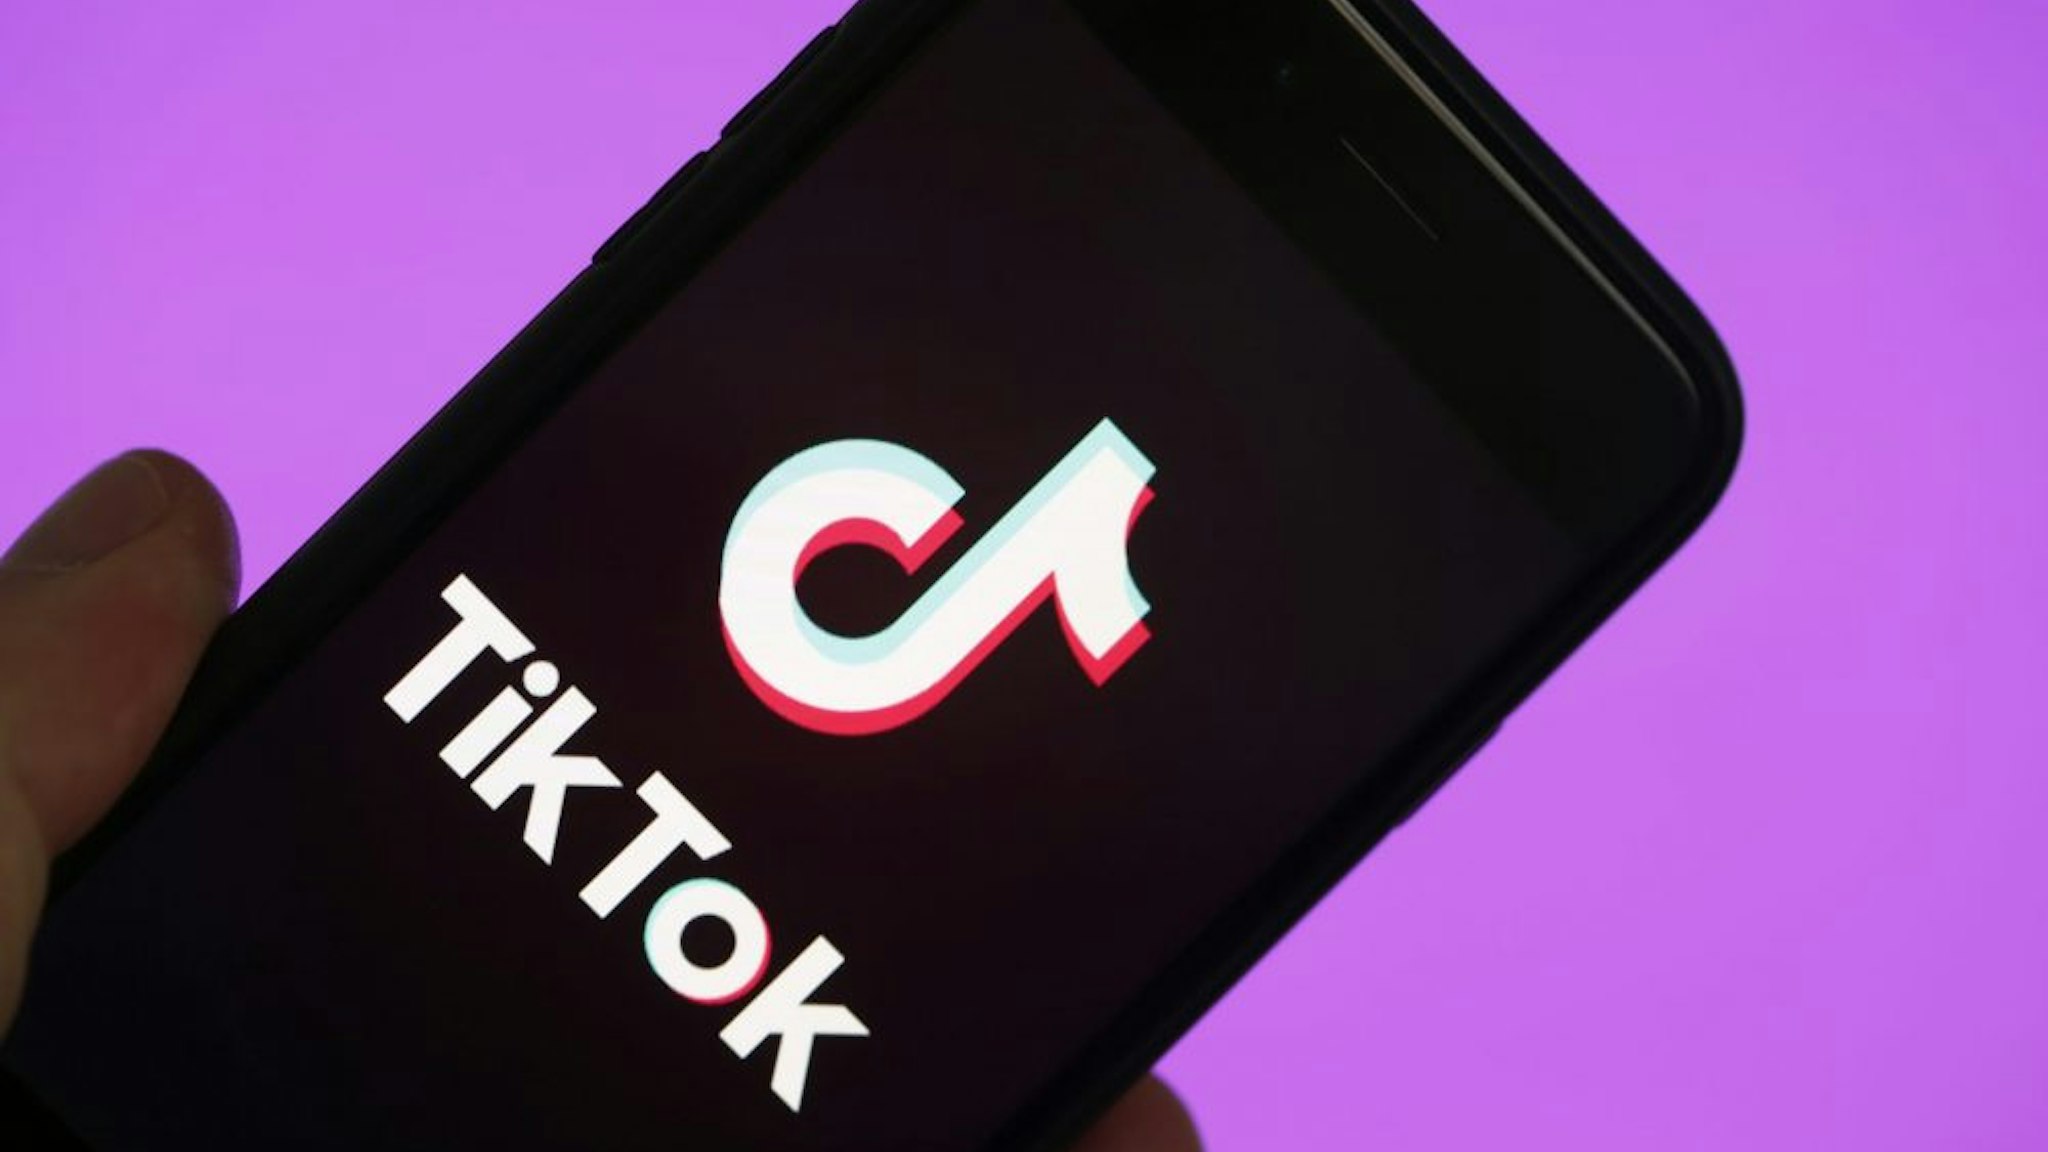 PARIS, FRANCE - MARCH 05: In this photo illustration, the social media application logo, Tik Tok is displayed on the screen of an iPhone on March 05, 2019 in Paris, France. The social network broke the rules for the protection of children's online privacy (COPPA) and was fined $ 5.7 million. The fact TikTok criticized is quite serious in the United States, the platform, which currently has more than 500 million users worldwide, collected data that should not have asked minors. TikTok, also known as Douyin in China, is a media app for creating and sharing short videos. Owned by ByteDance, Tik Tok is a leading video platform in Asia, United States, and other parts of the world. In 2018, the application gained popularity and became the most downloaded app in the U.S. in October 2018.